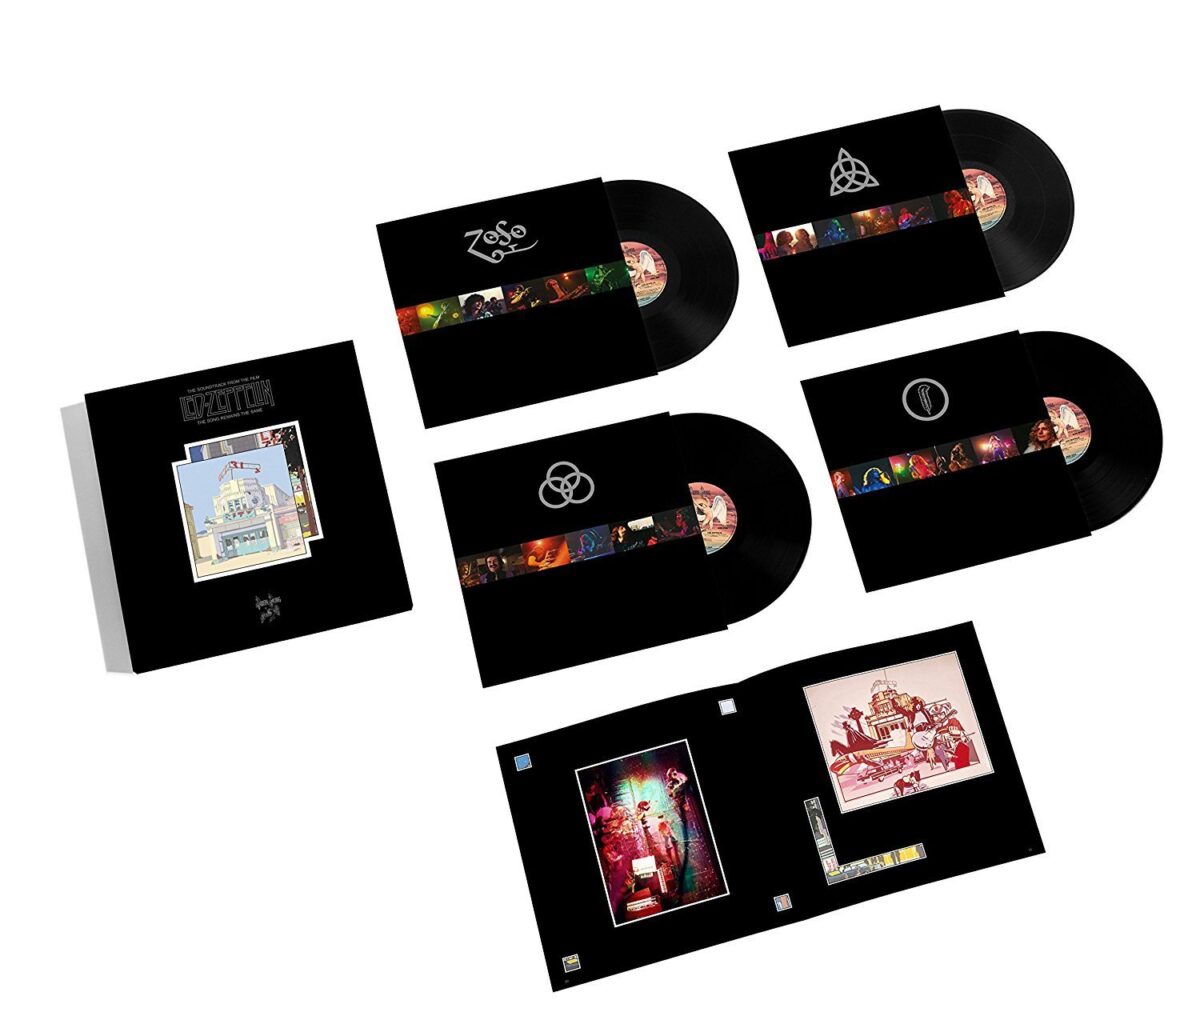 Led Zeppelin - The Soundtrack From The Film Led Zeppelin The Song Remains The Same 4 LPs BOXSET